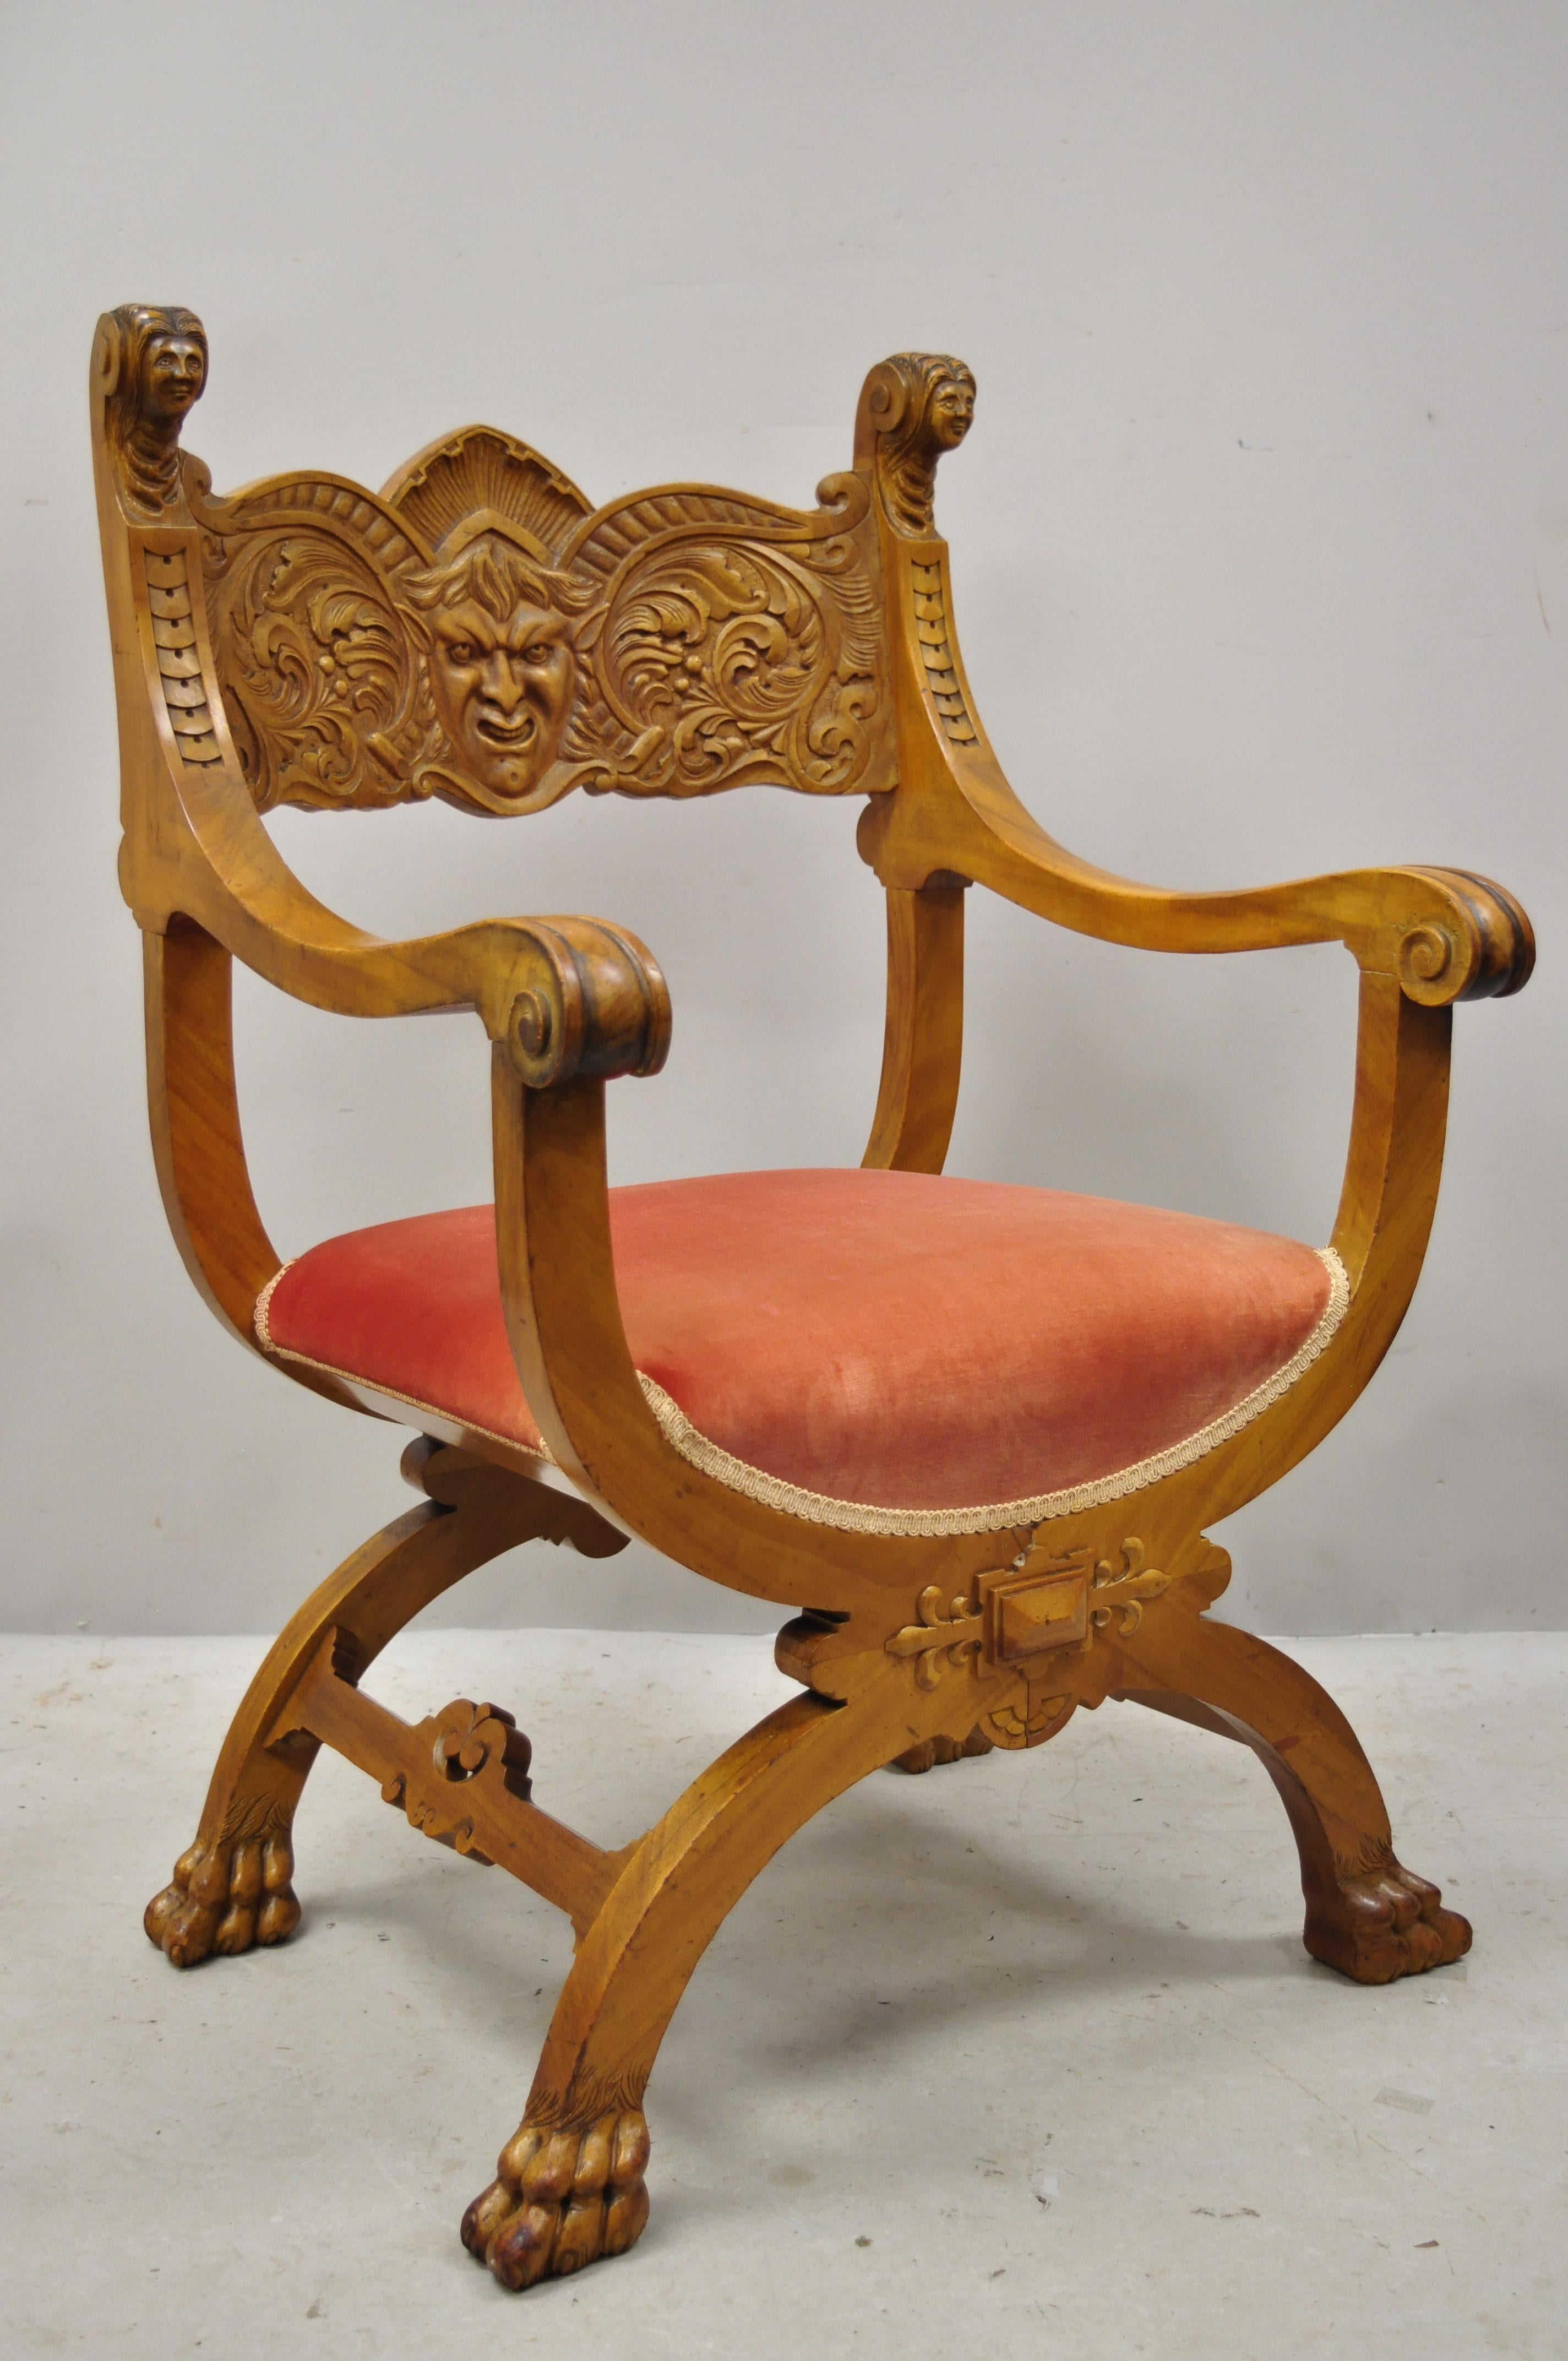 Antique Italian Renaissance figural carved mahogany & velvet curule throne armchair. Item features a carved face and leafy scrollwork, female faces to finials, paw feet, curule base, solid wood frame, beautiful wood grain, circa early 1900s.